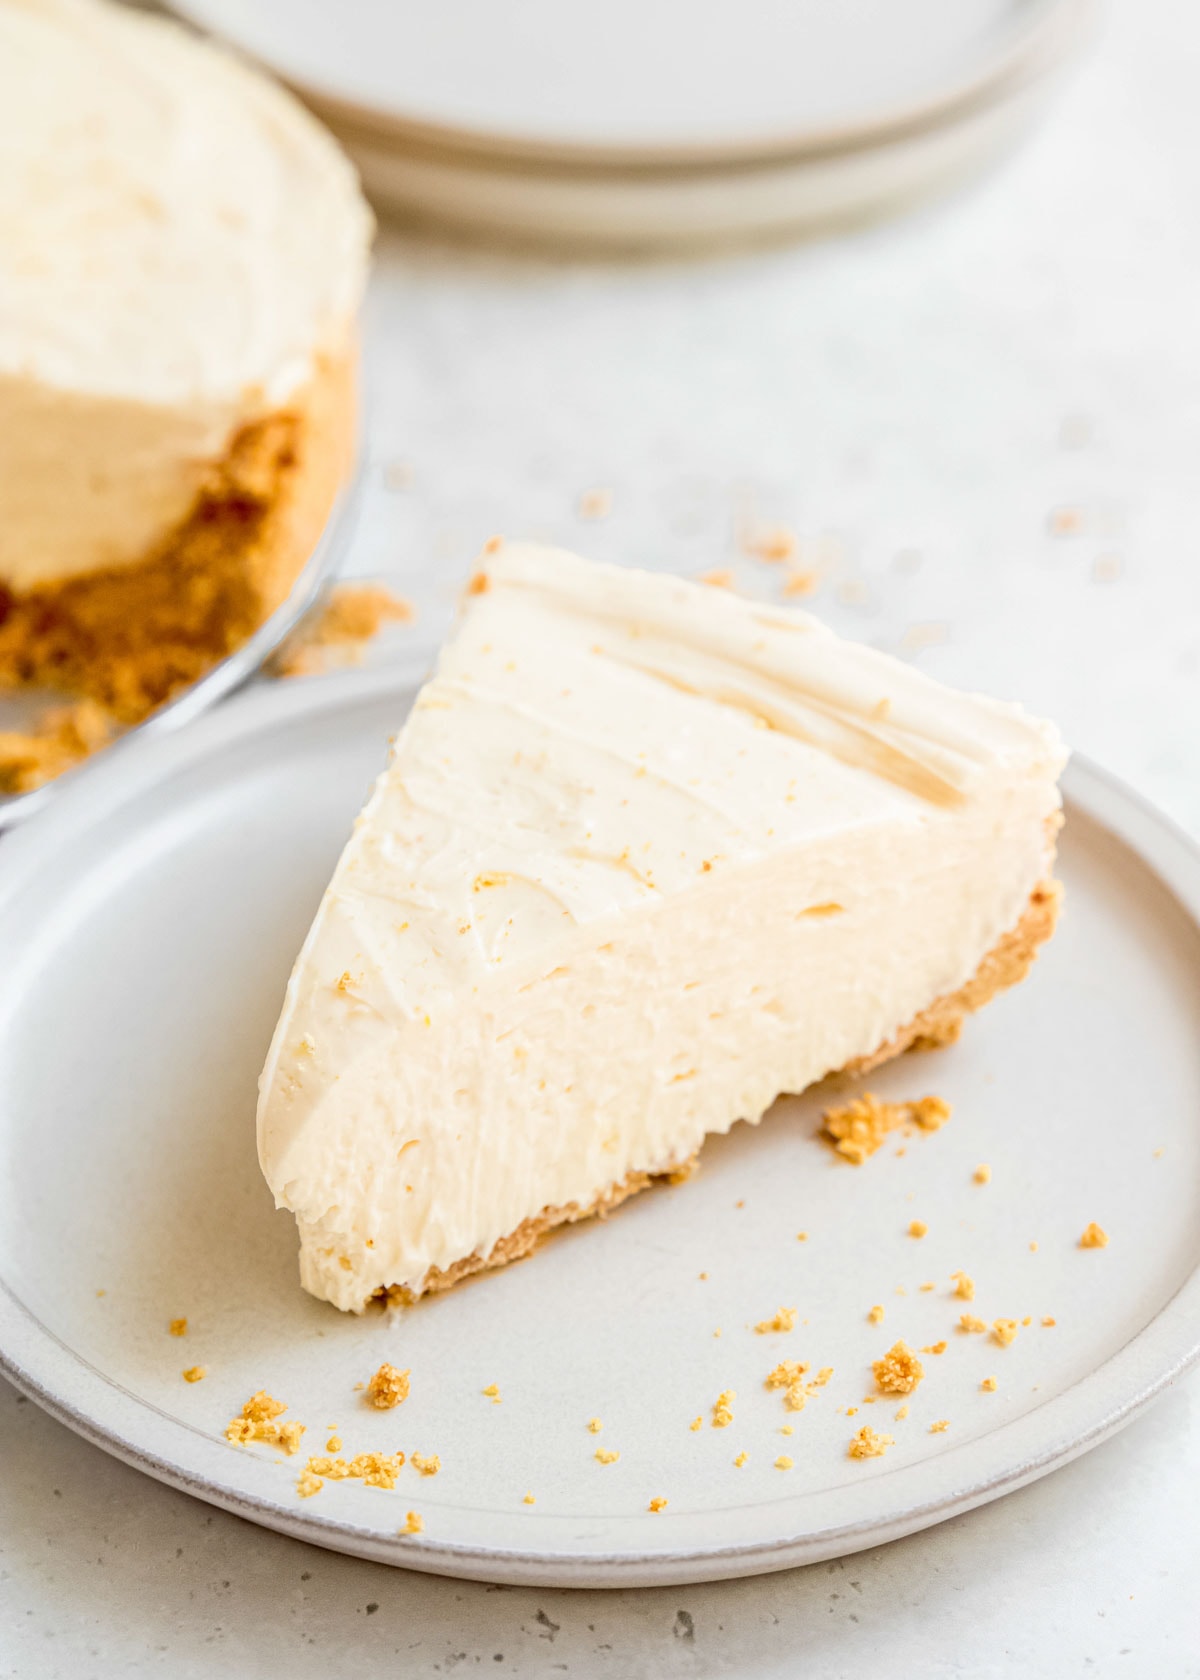 This No Bake Lemon Cheesecake is the perfect summer dessert! It's easy to make ahead of time, super creamy, and bursting with citrus flavor.